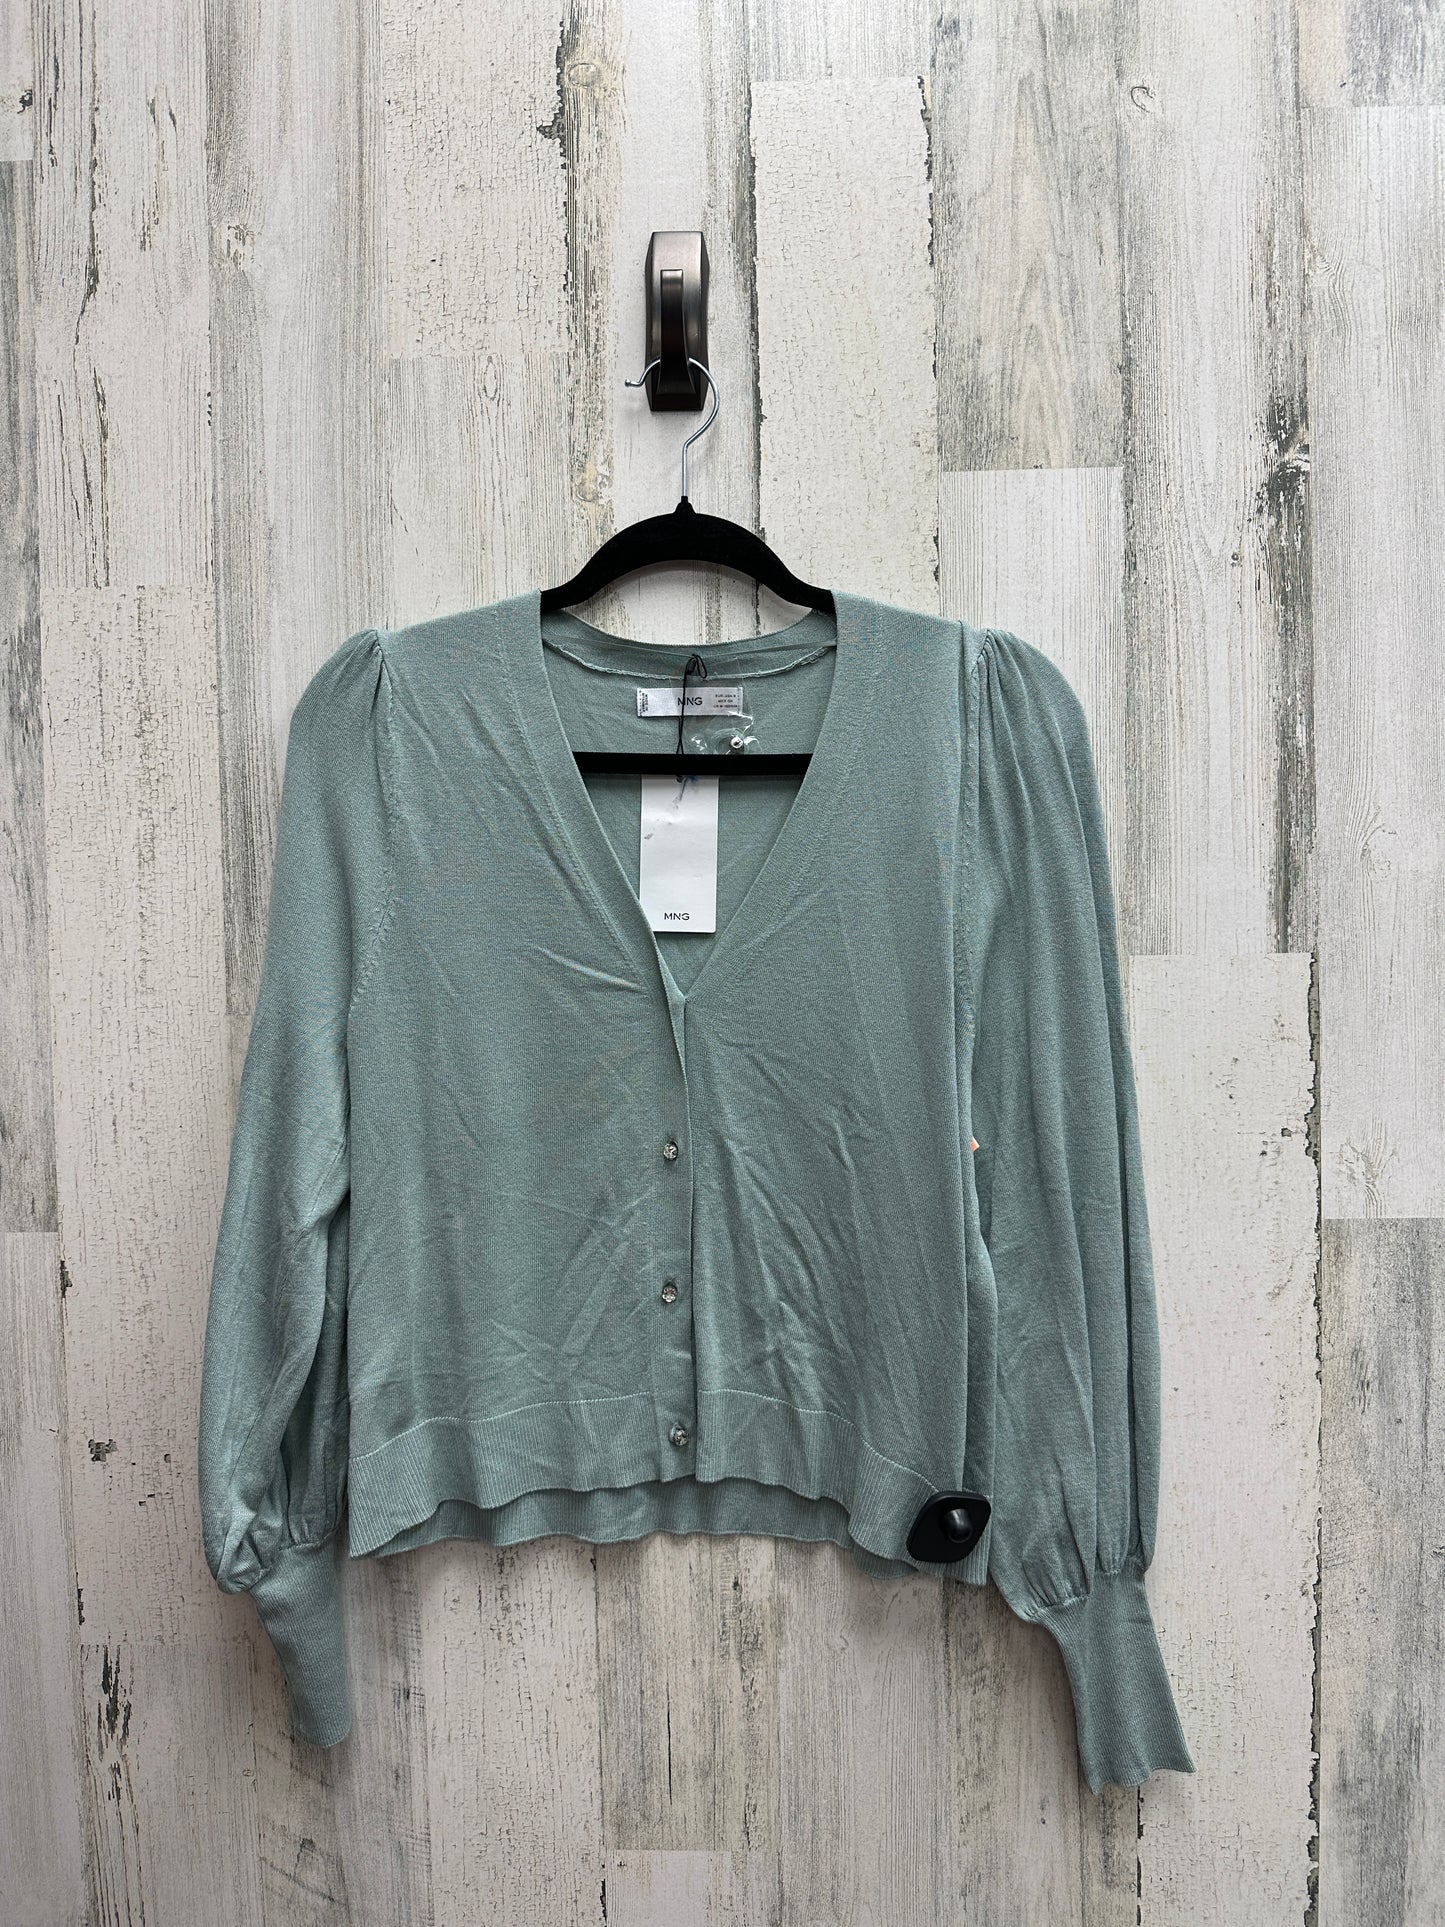 Sweater Cardigan By Mng  Size: S